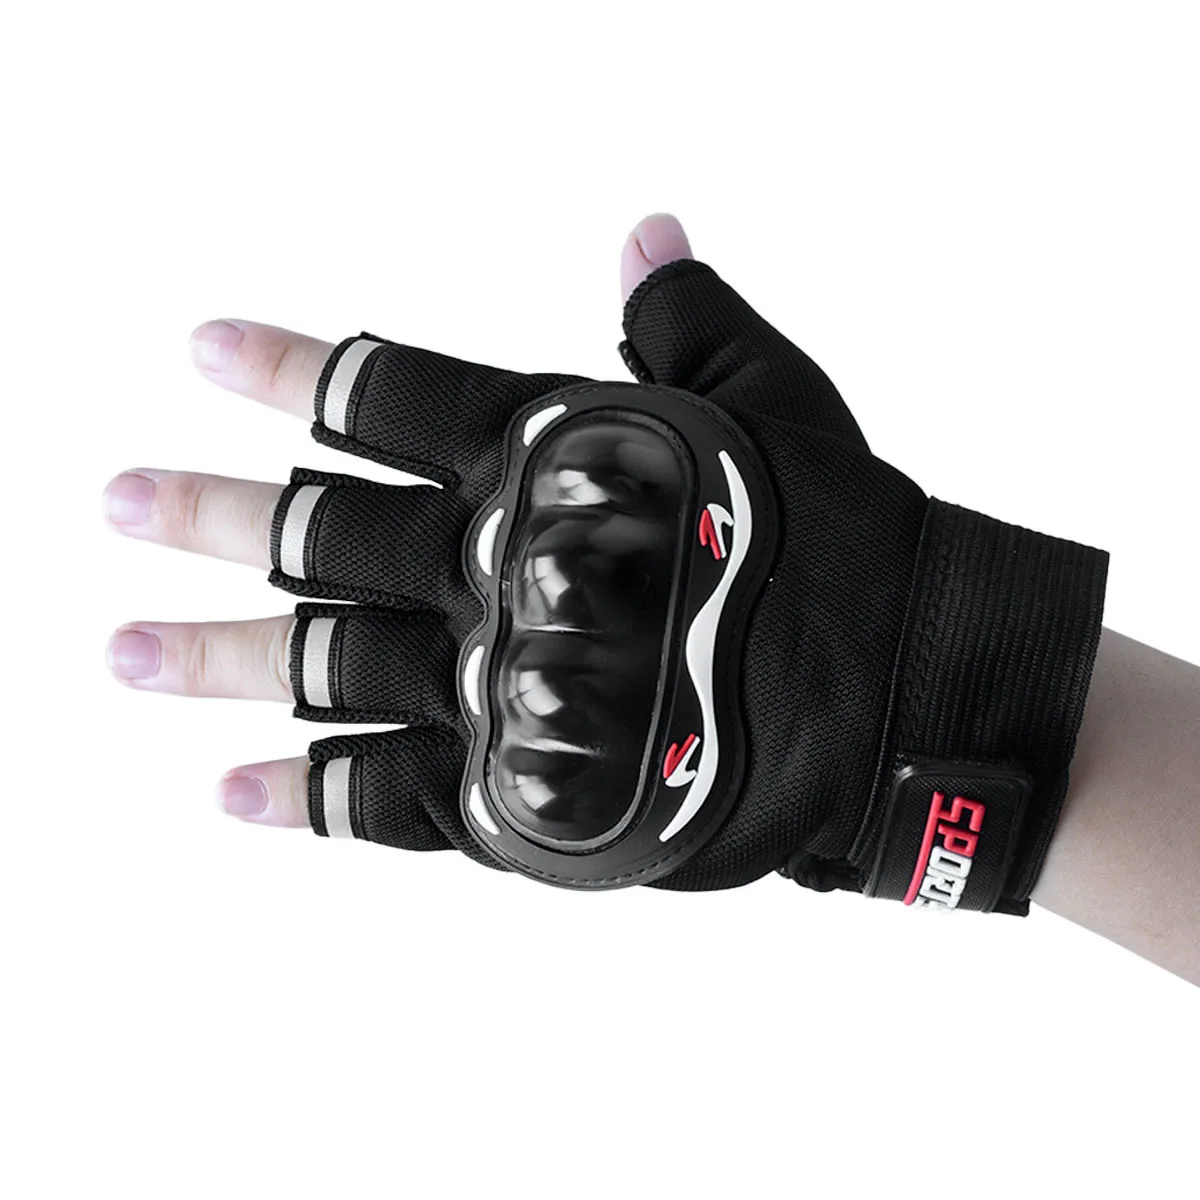 Black touchscreen half-finger gloves for outdoor activities, cycling, and - $12.70